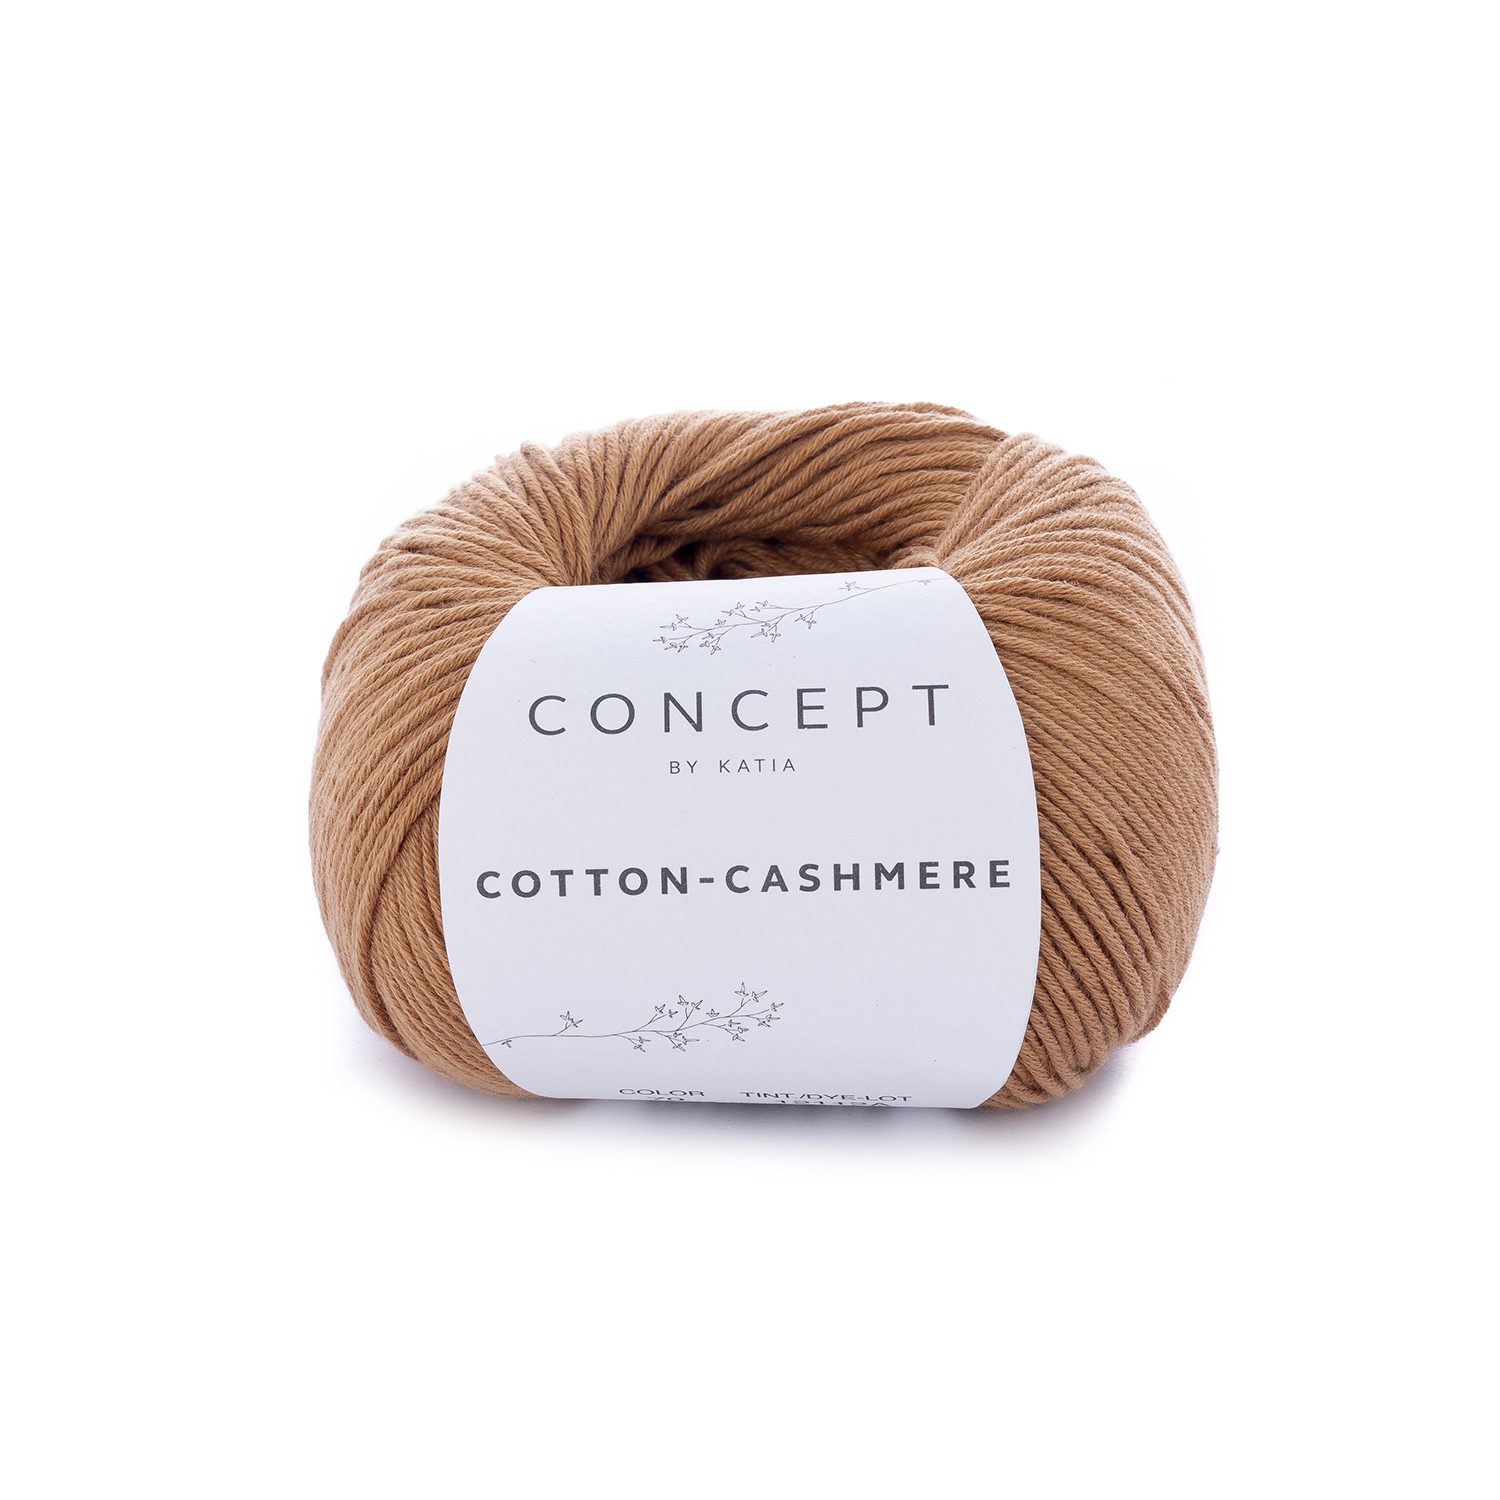 yarn-wool-cottoncashmere-knit-cotton-cashmere-brown-all-katia-70-g